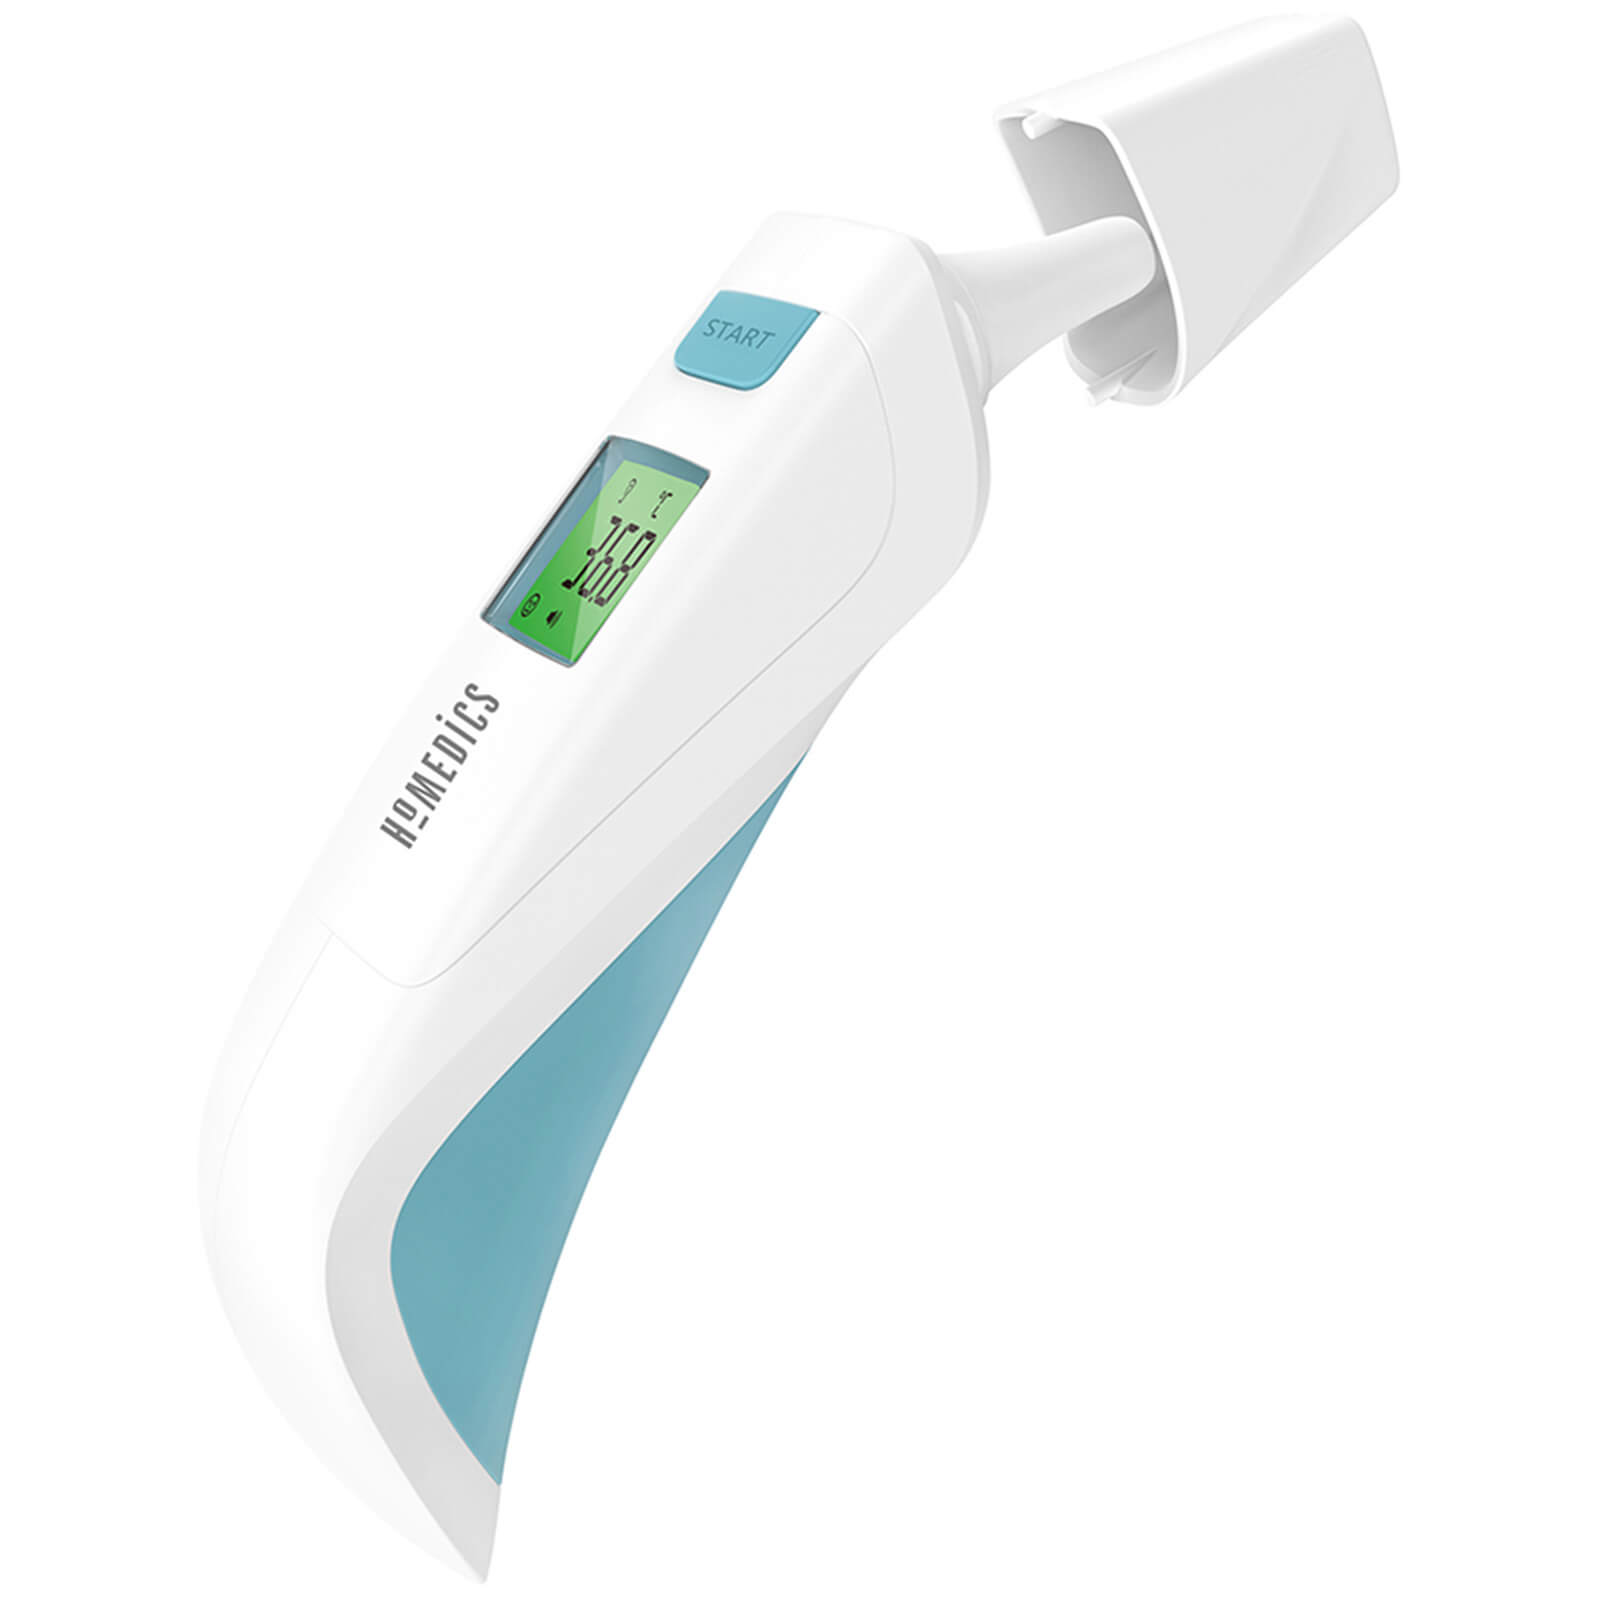 HoMedics Infra Red No Touch Thermometer